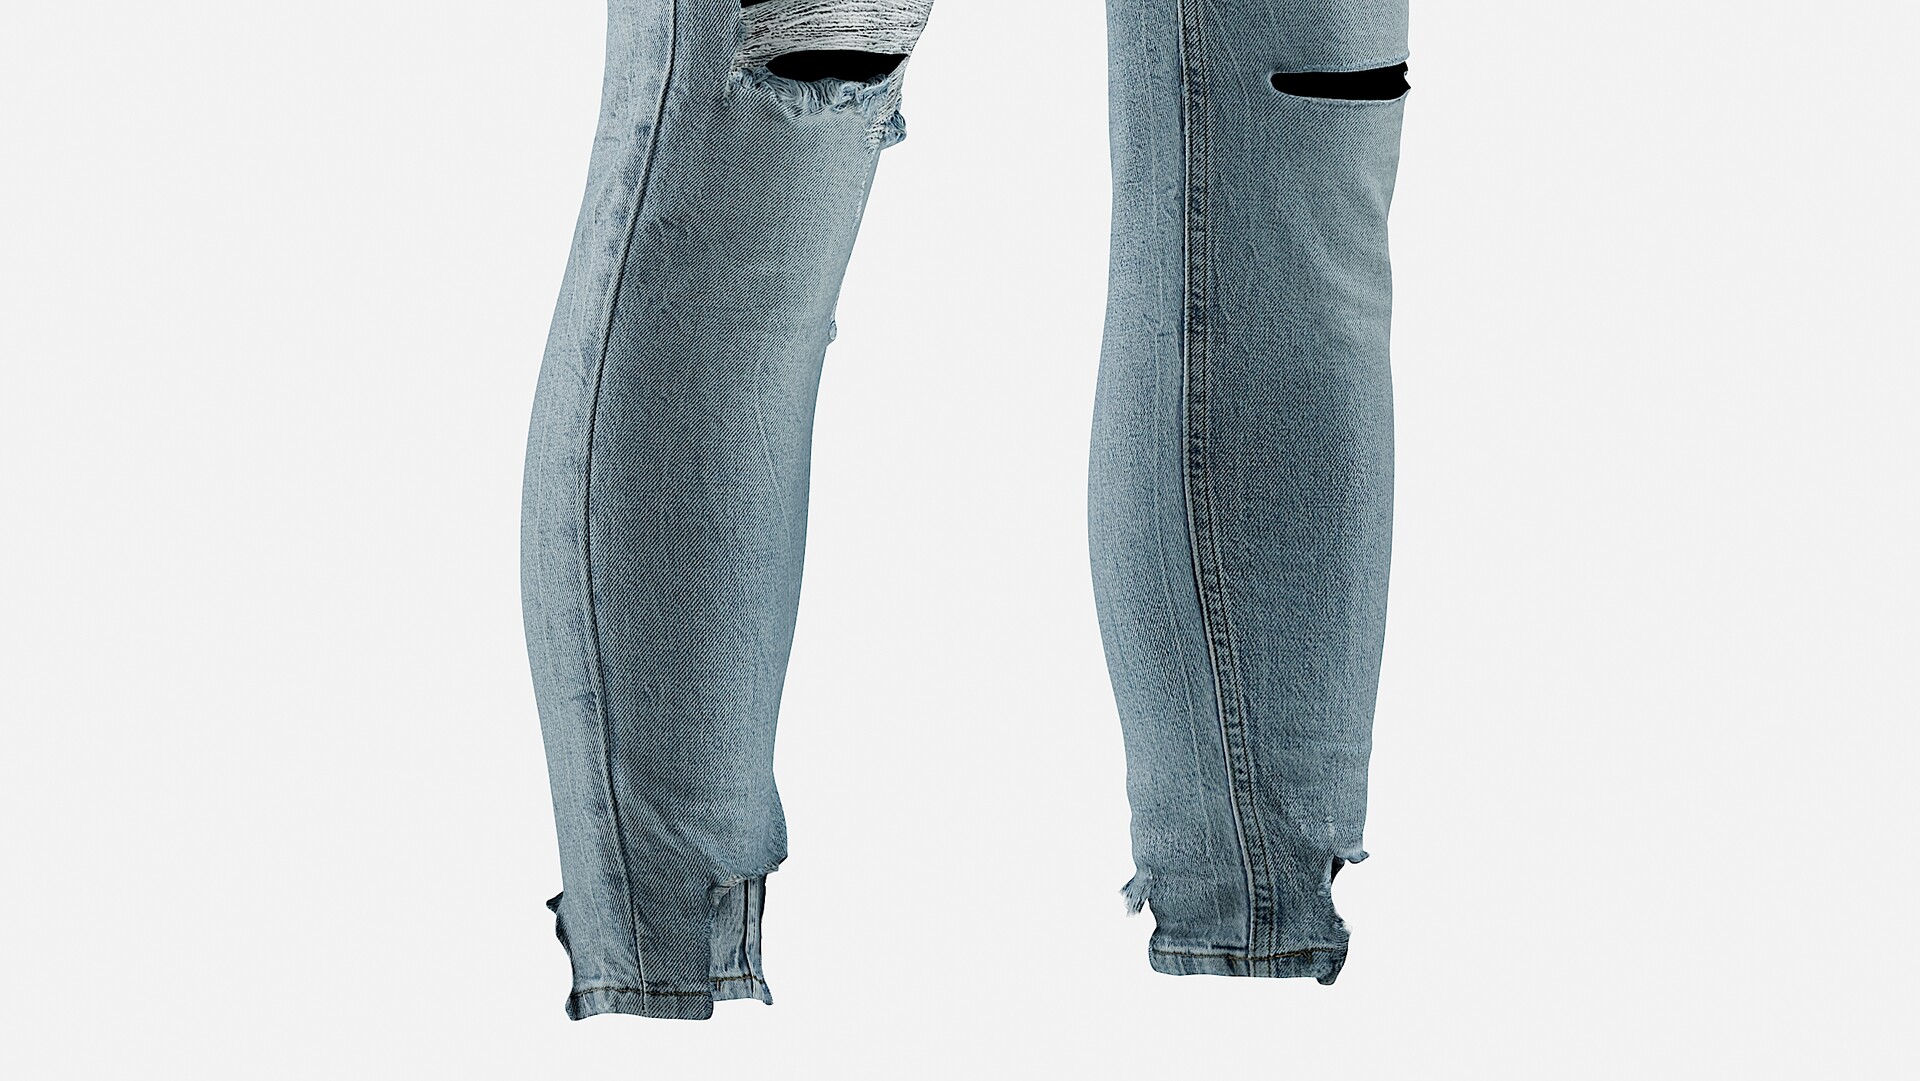 Nice Pictures - Realistic 3D model of Men's Jeans